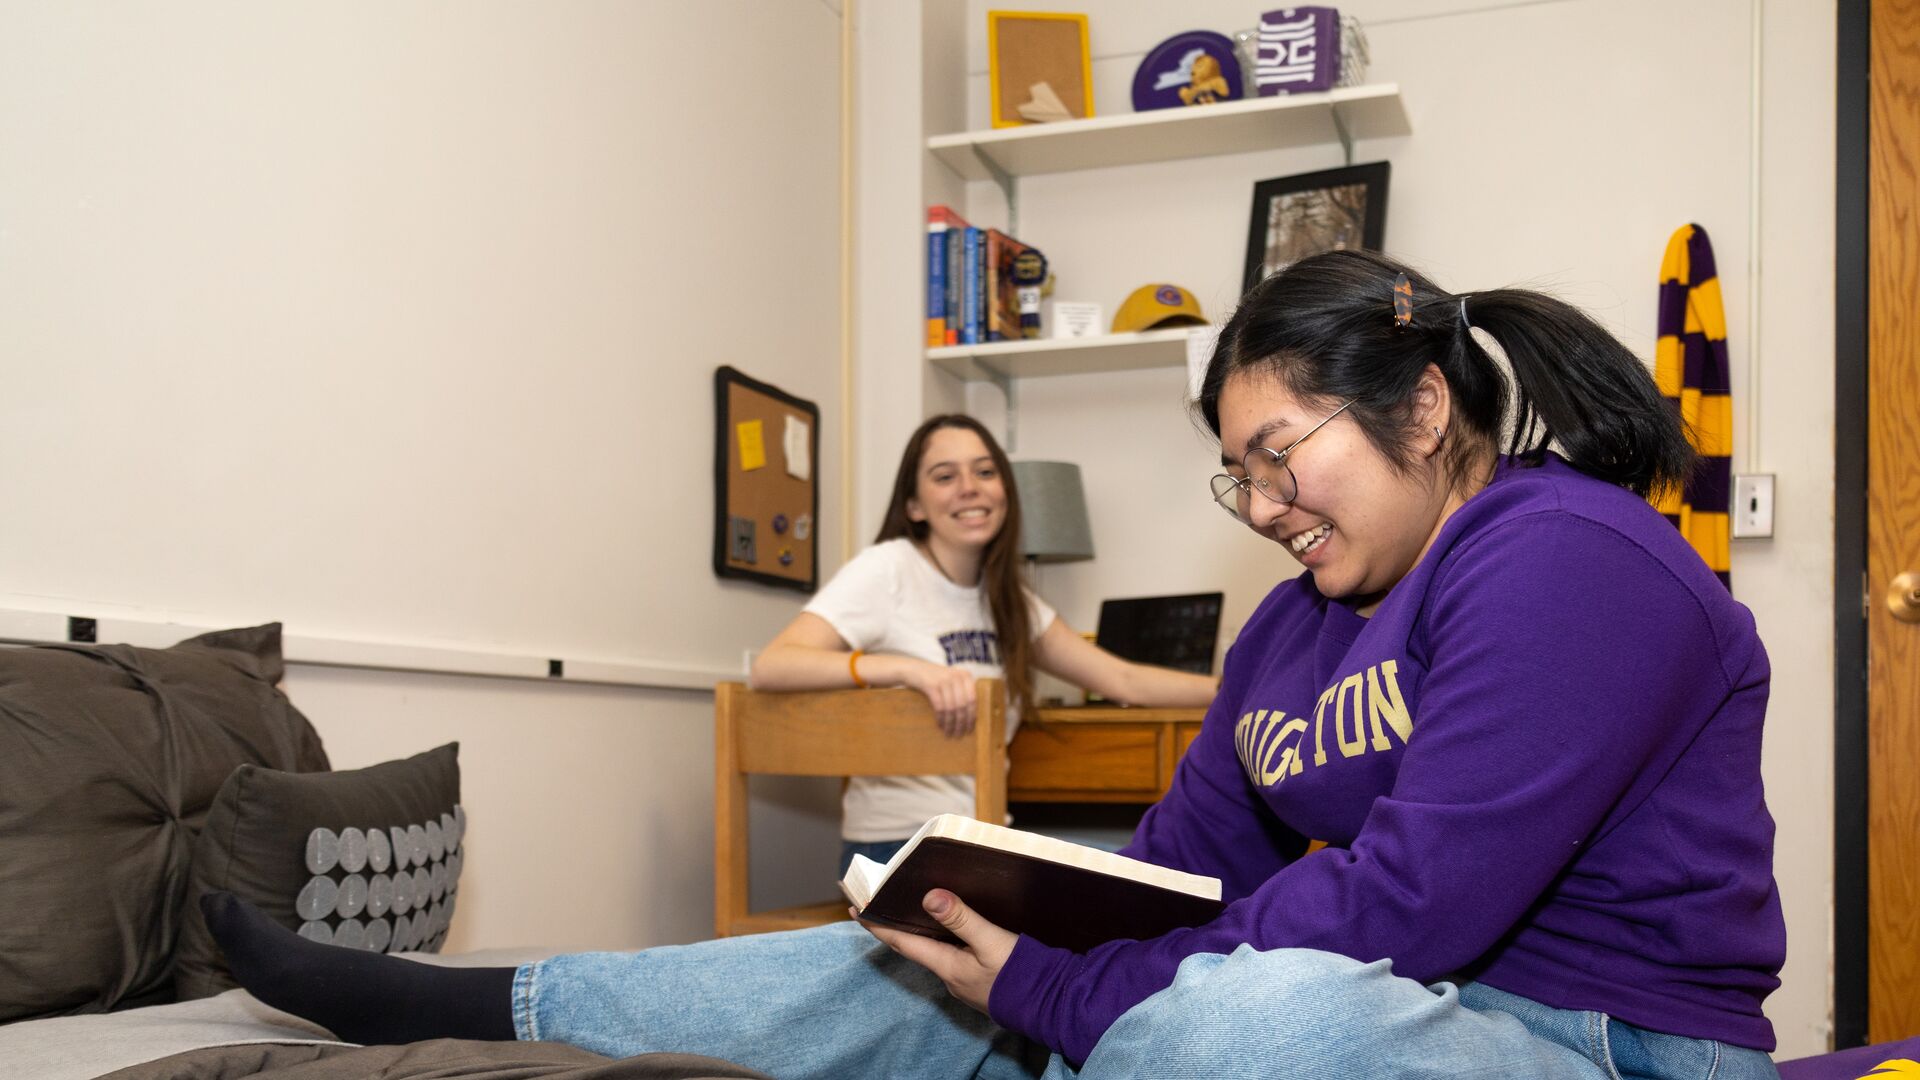 Two Houghton students sitting in dorm room reading and hanging out together.